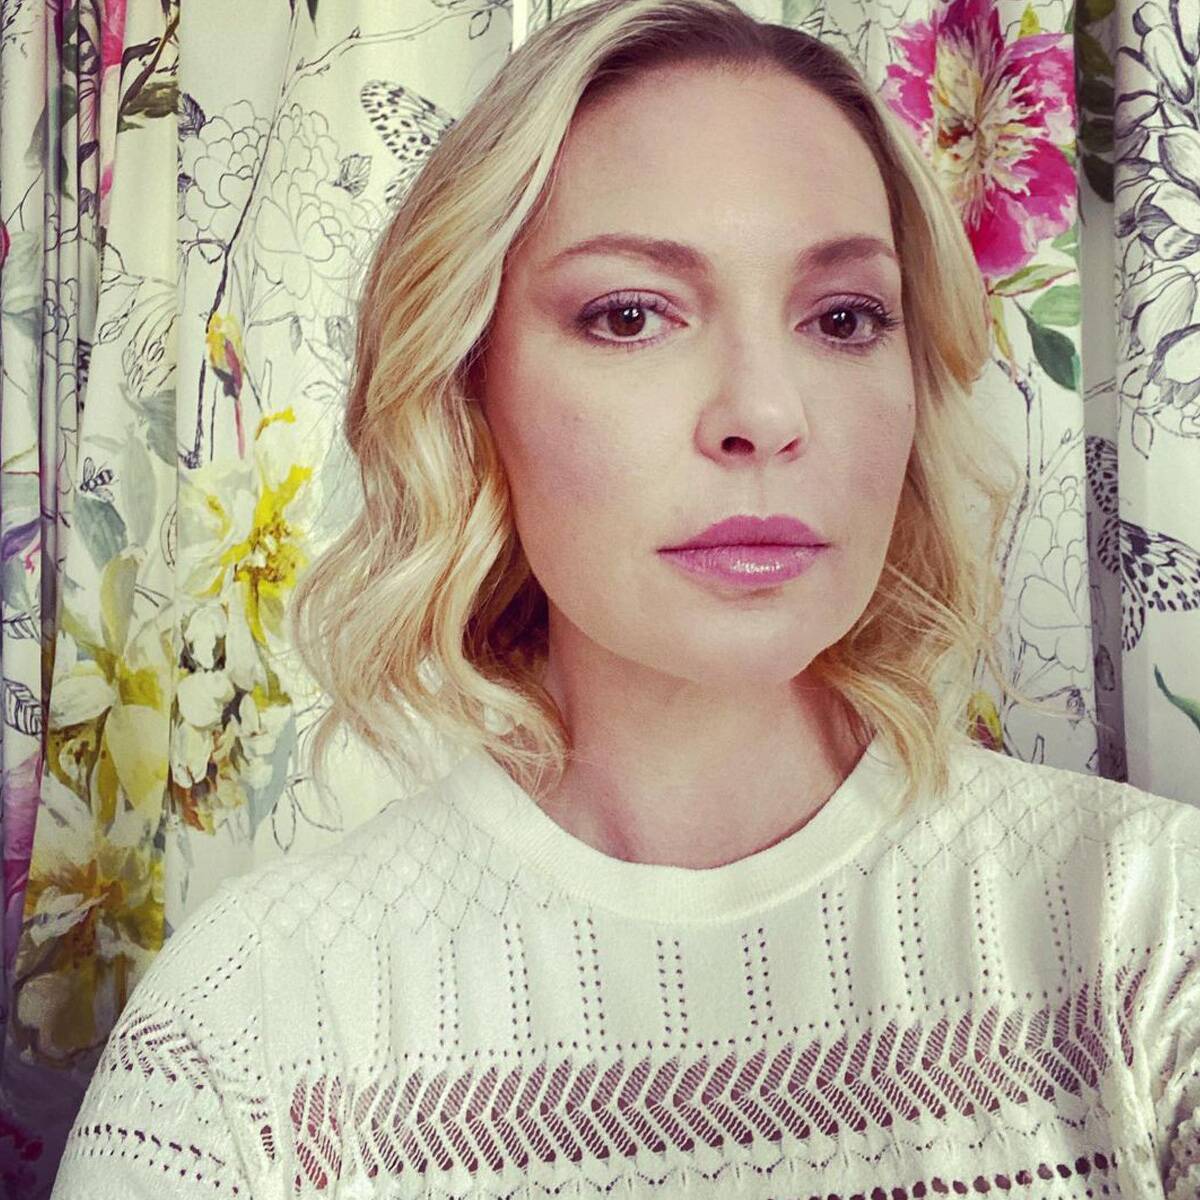 Katherine Heigl Recalls Thinking She'd "Rather Be Dead" After "Difficult" Label Ruined Her Reputation